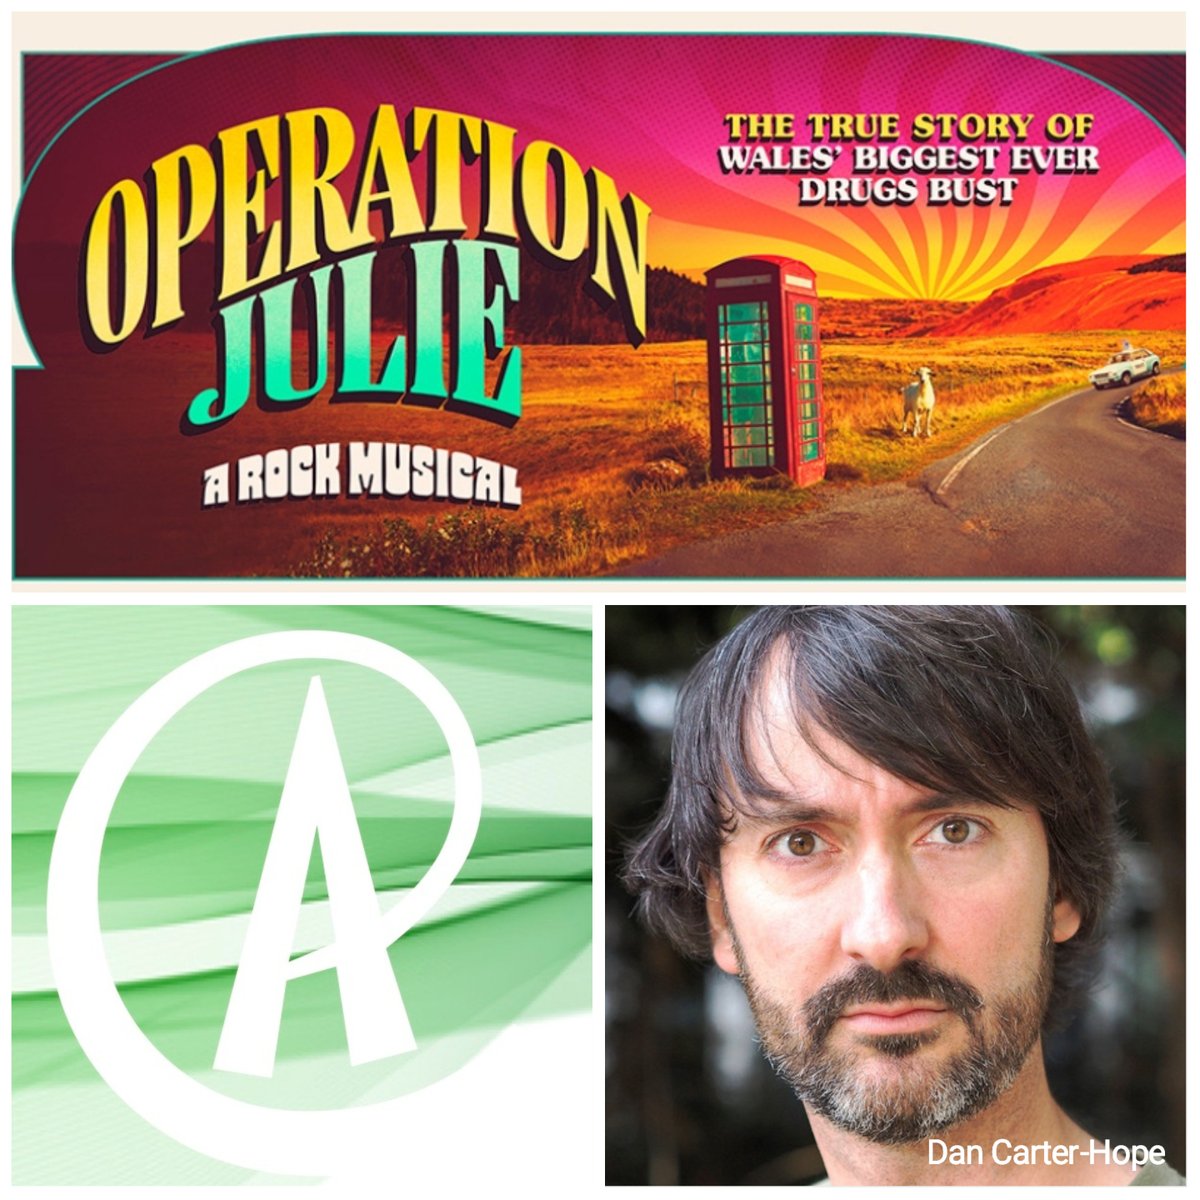 Best wishes to @danhopeless who opens in #OperationJulie @theatrnanog this evening. theatr-nanog.co.uk/operation-julie